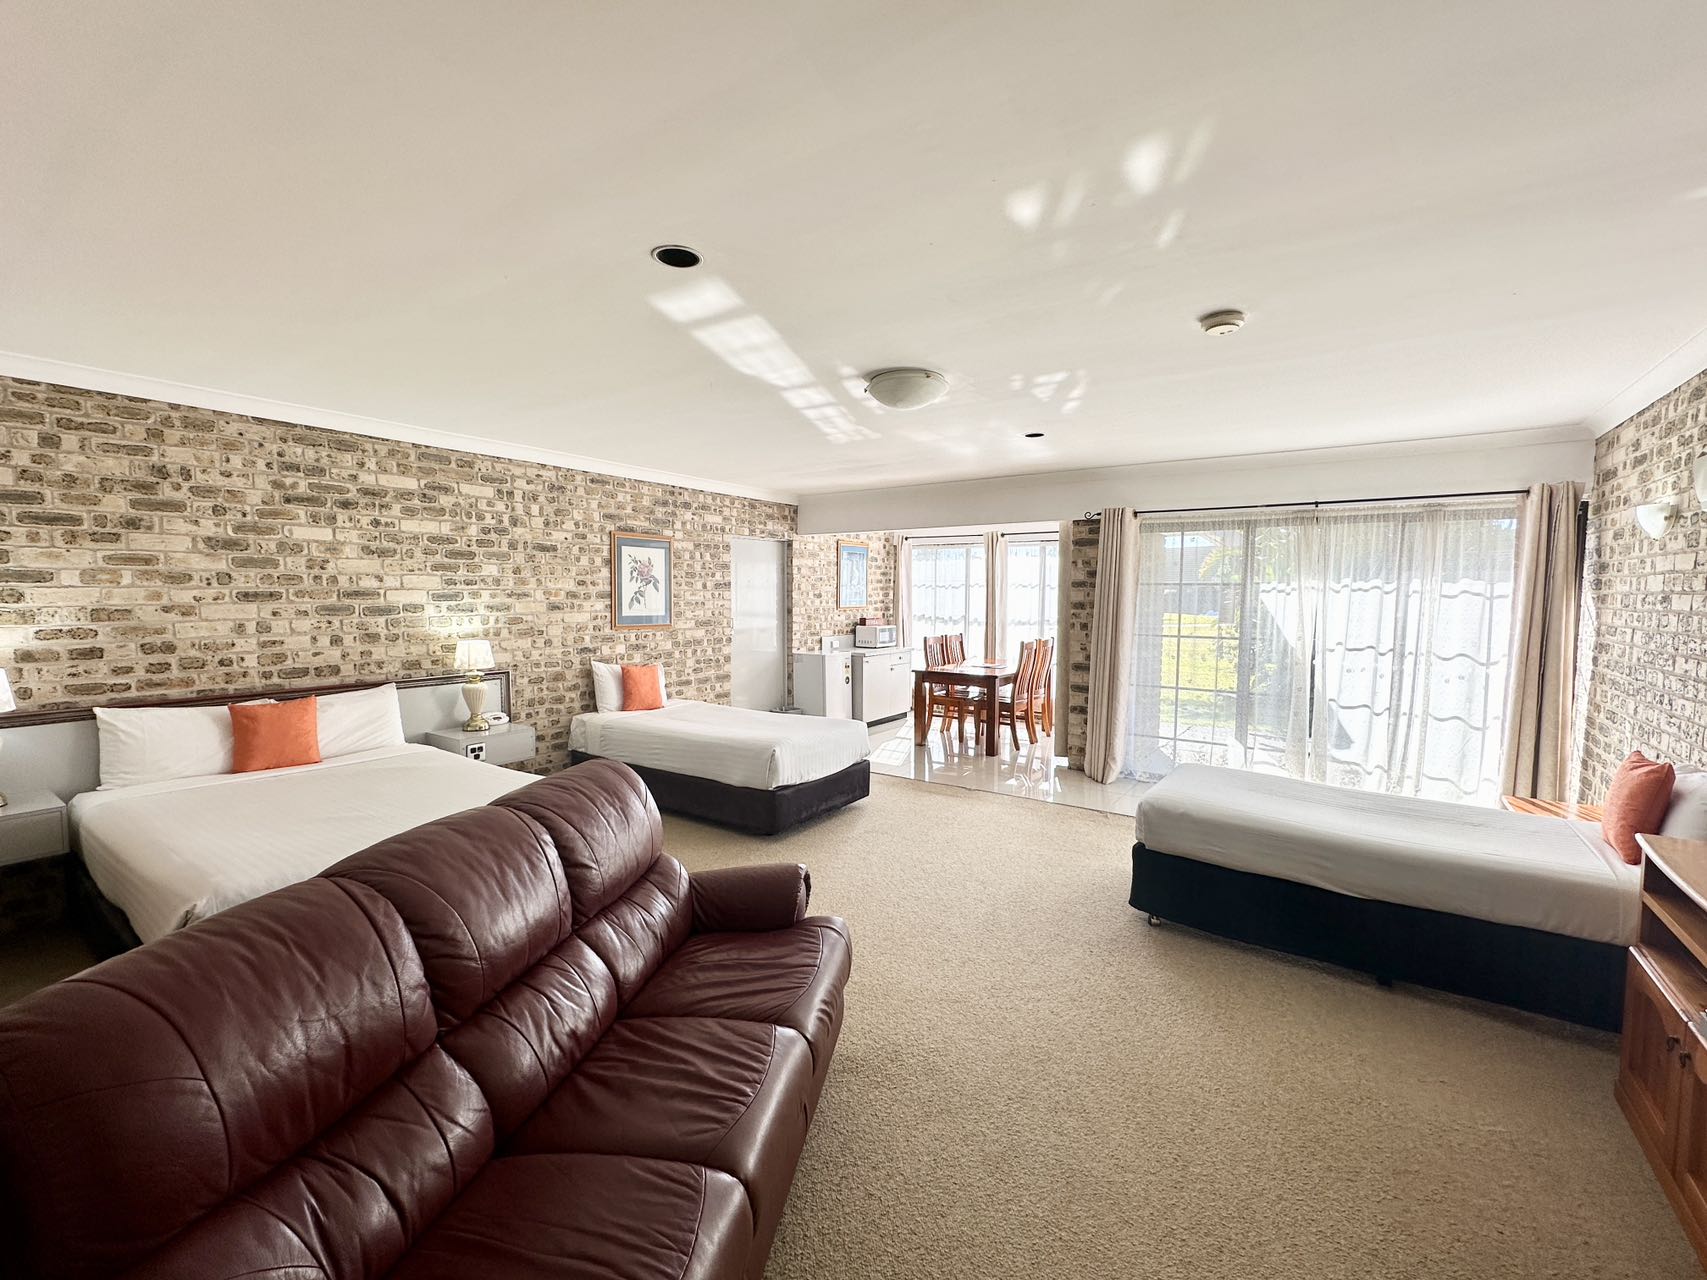 Sir Francis Drake Inn has a range of facilities to make your stay comfortable and relaxing